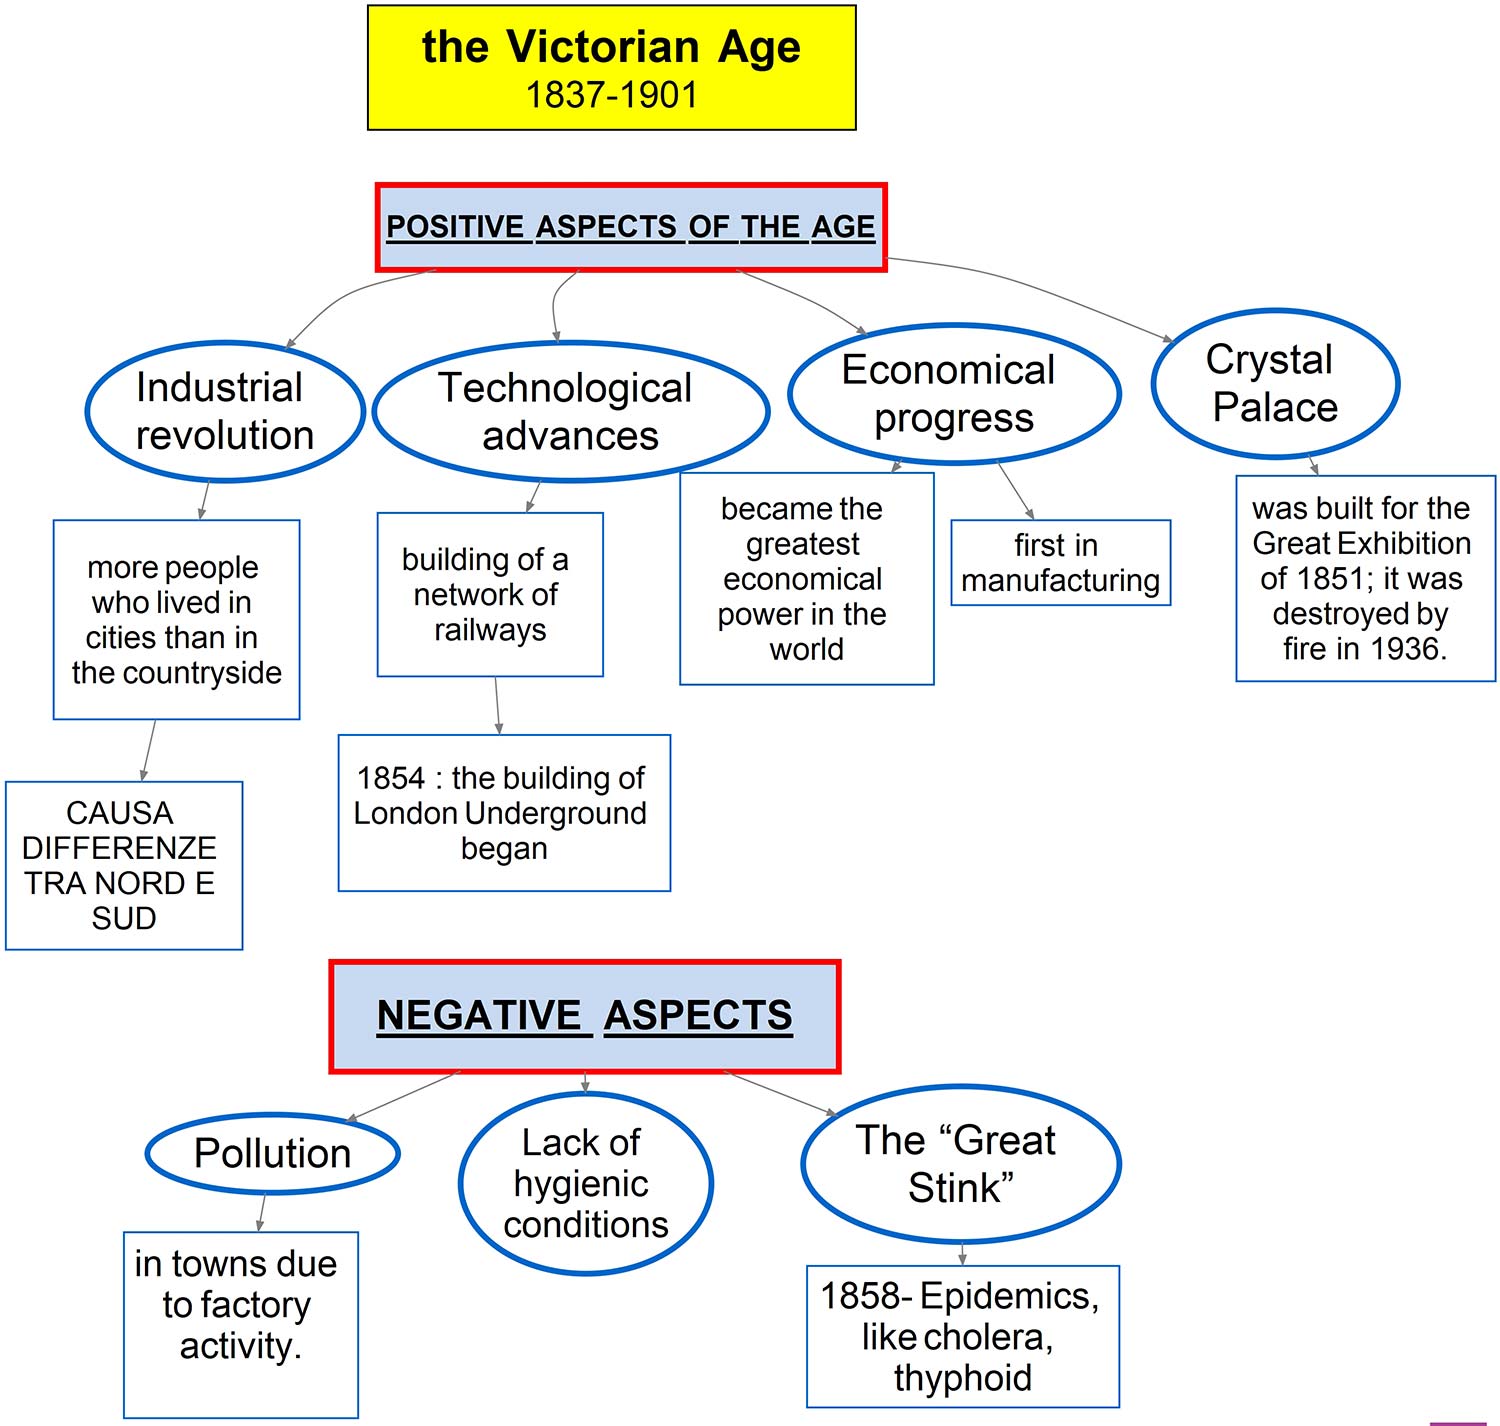 The Victorian Age - positive and negative aspects